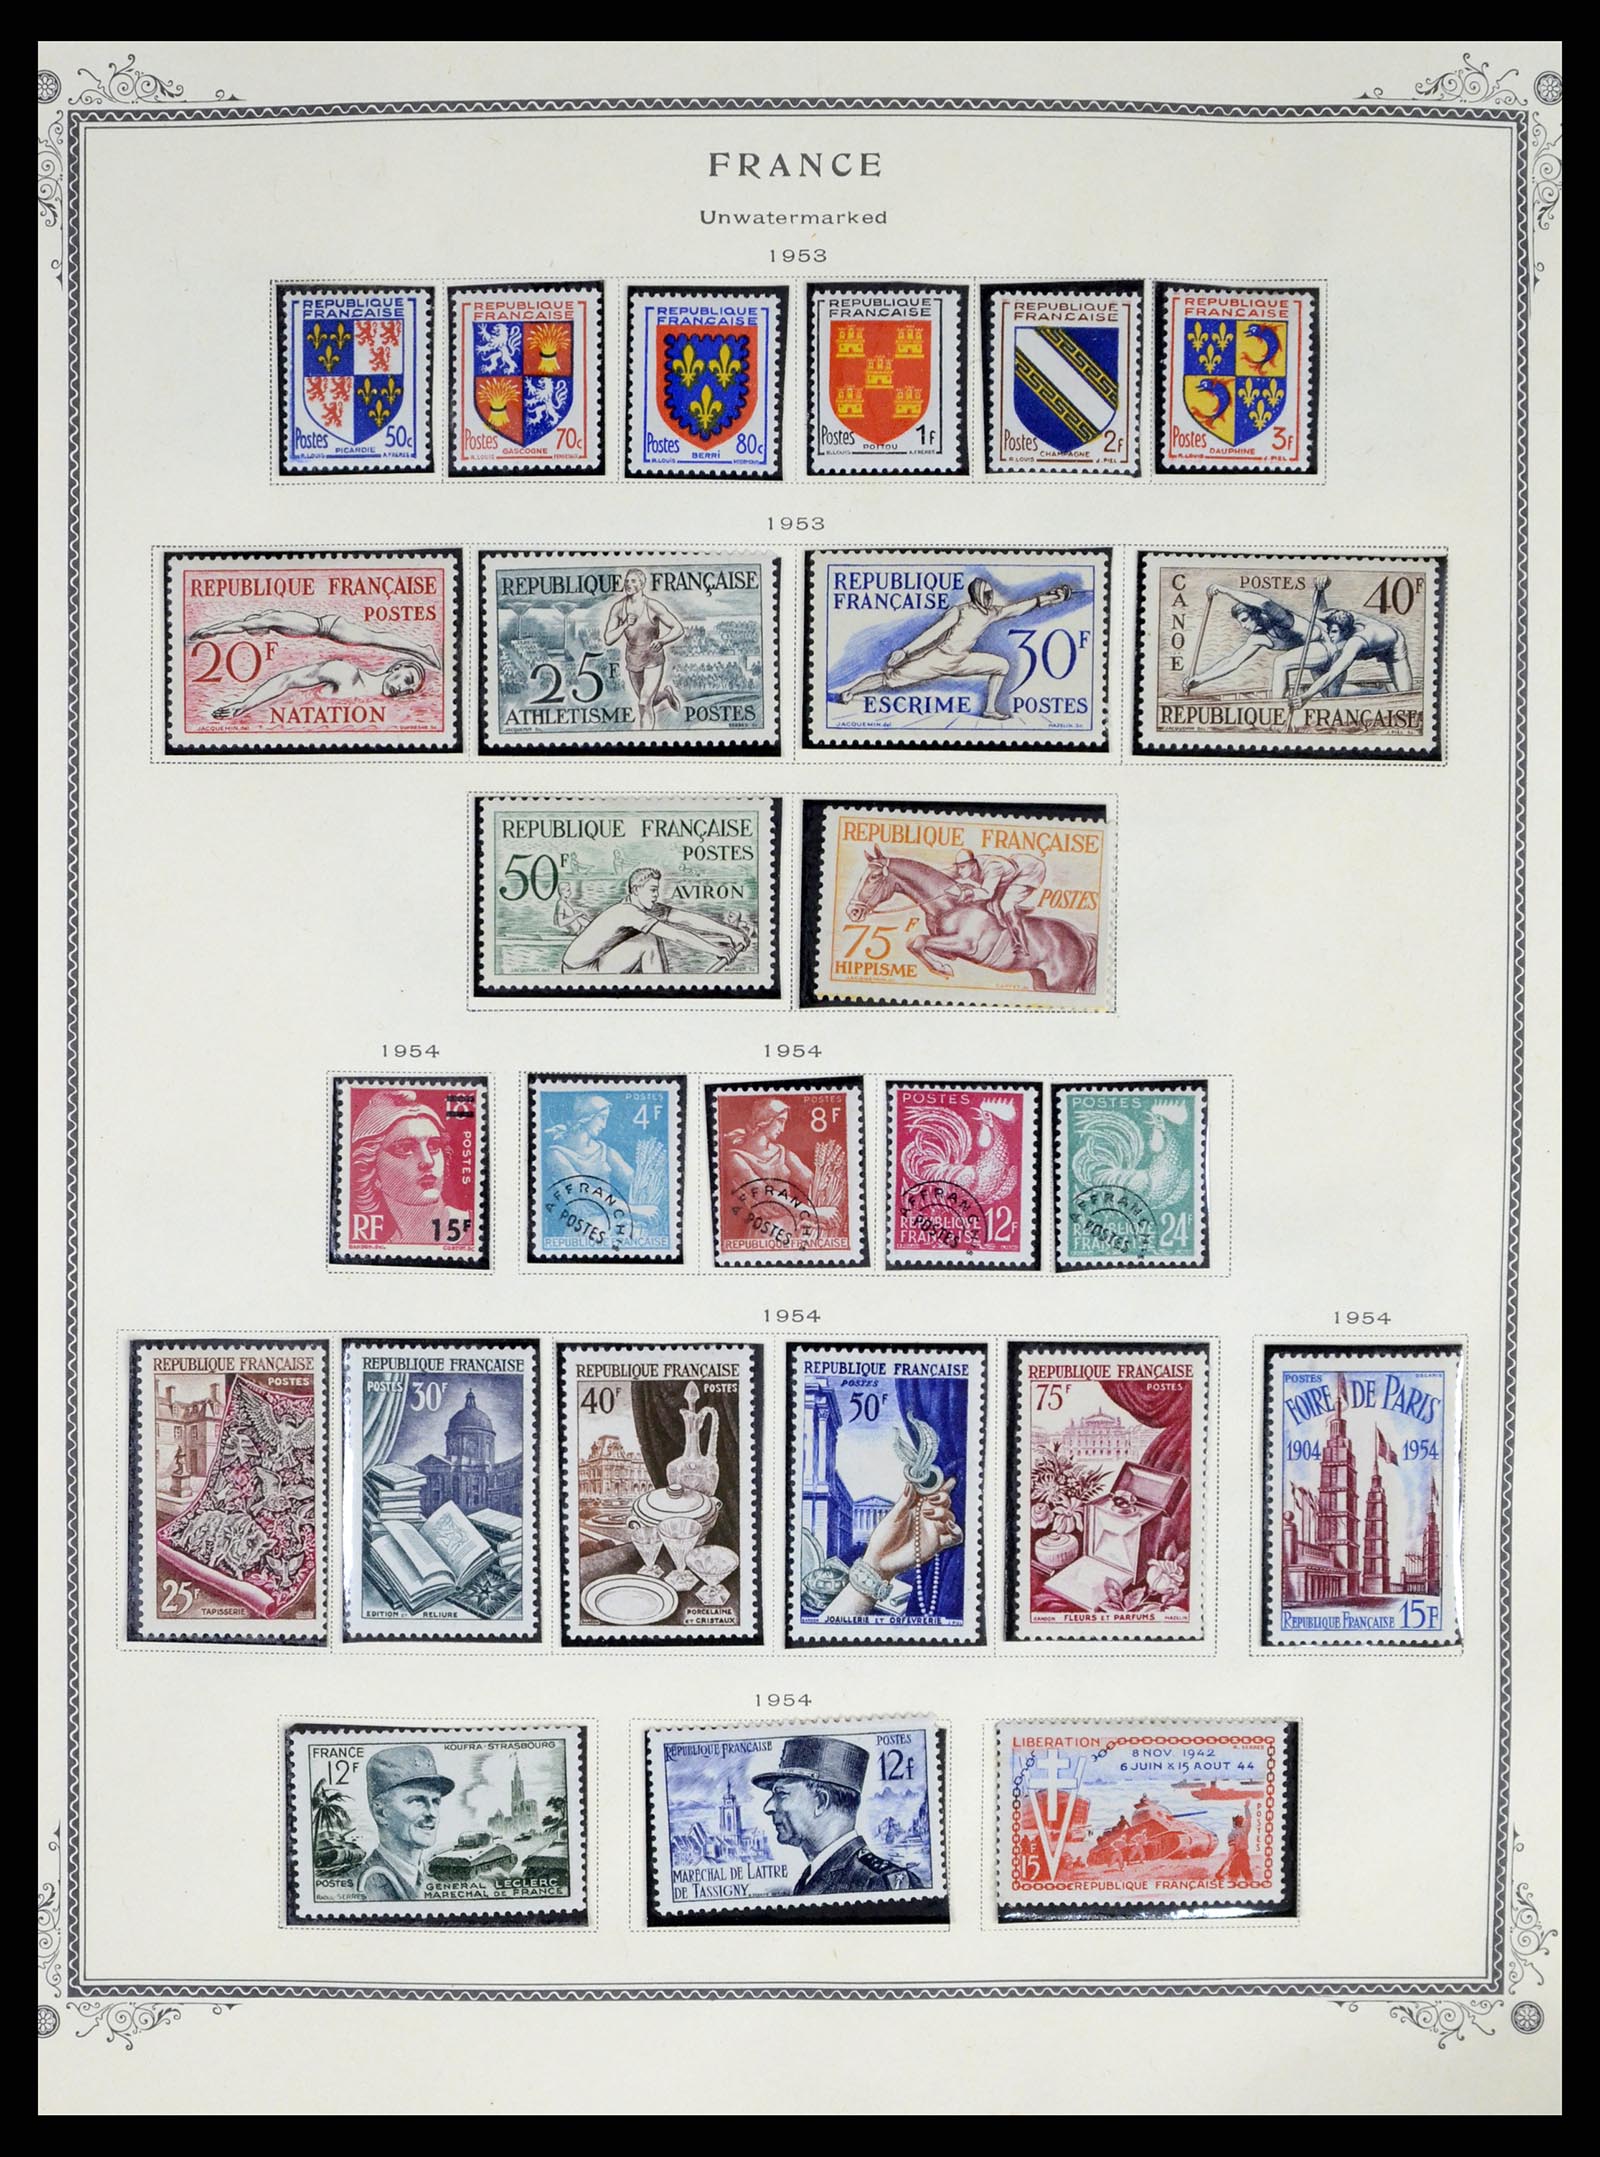 37639 027 - Stamp collection 37639 France 1853-1984.